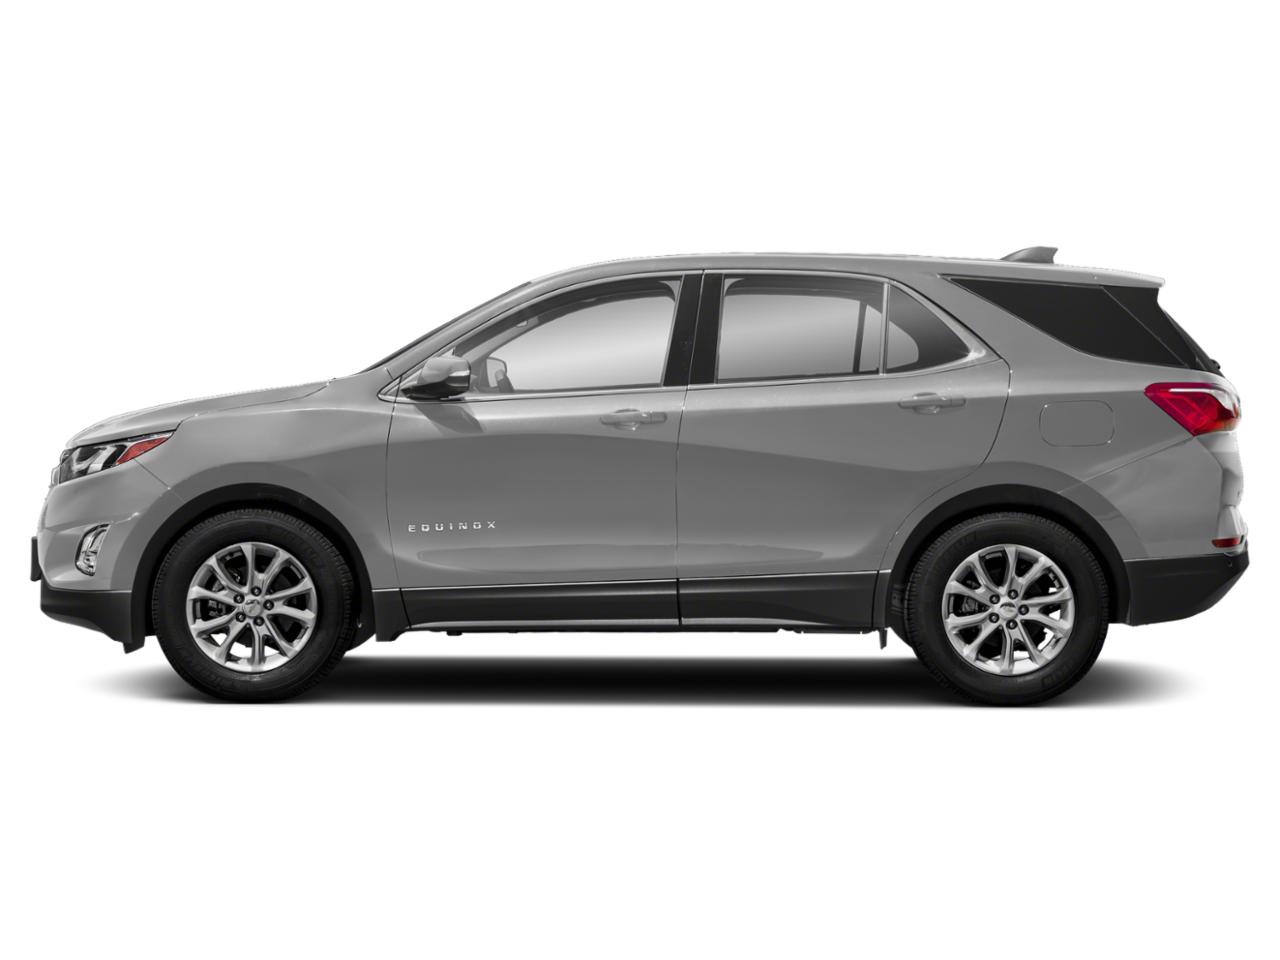 Used 2018 Chevrolet Equinox LT with VIN 2GNAXTEX6J6221139 for sale in Glenwood, Minnesota